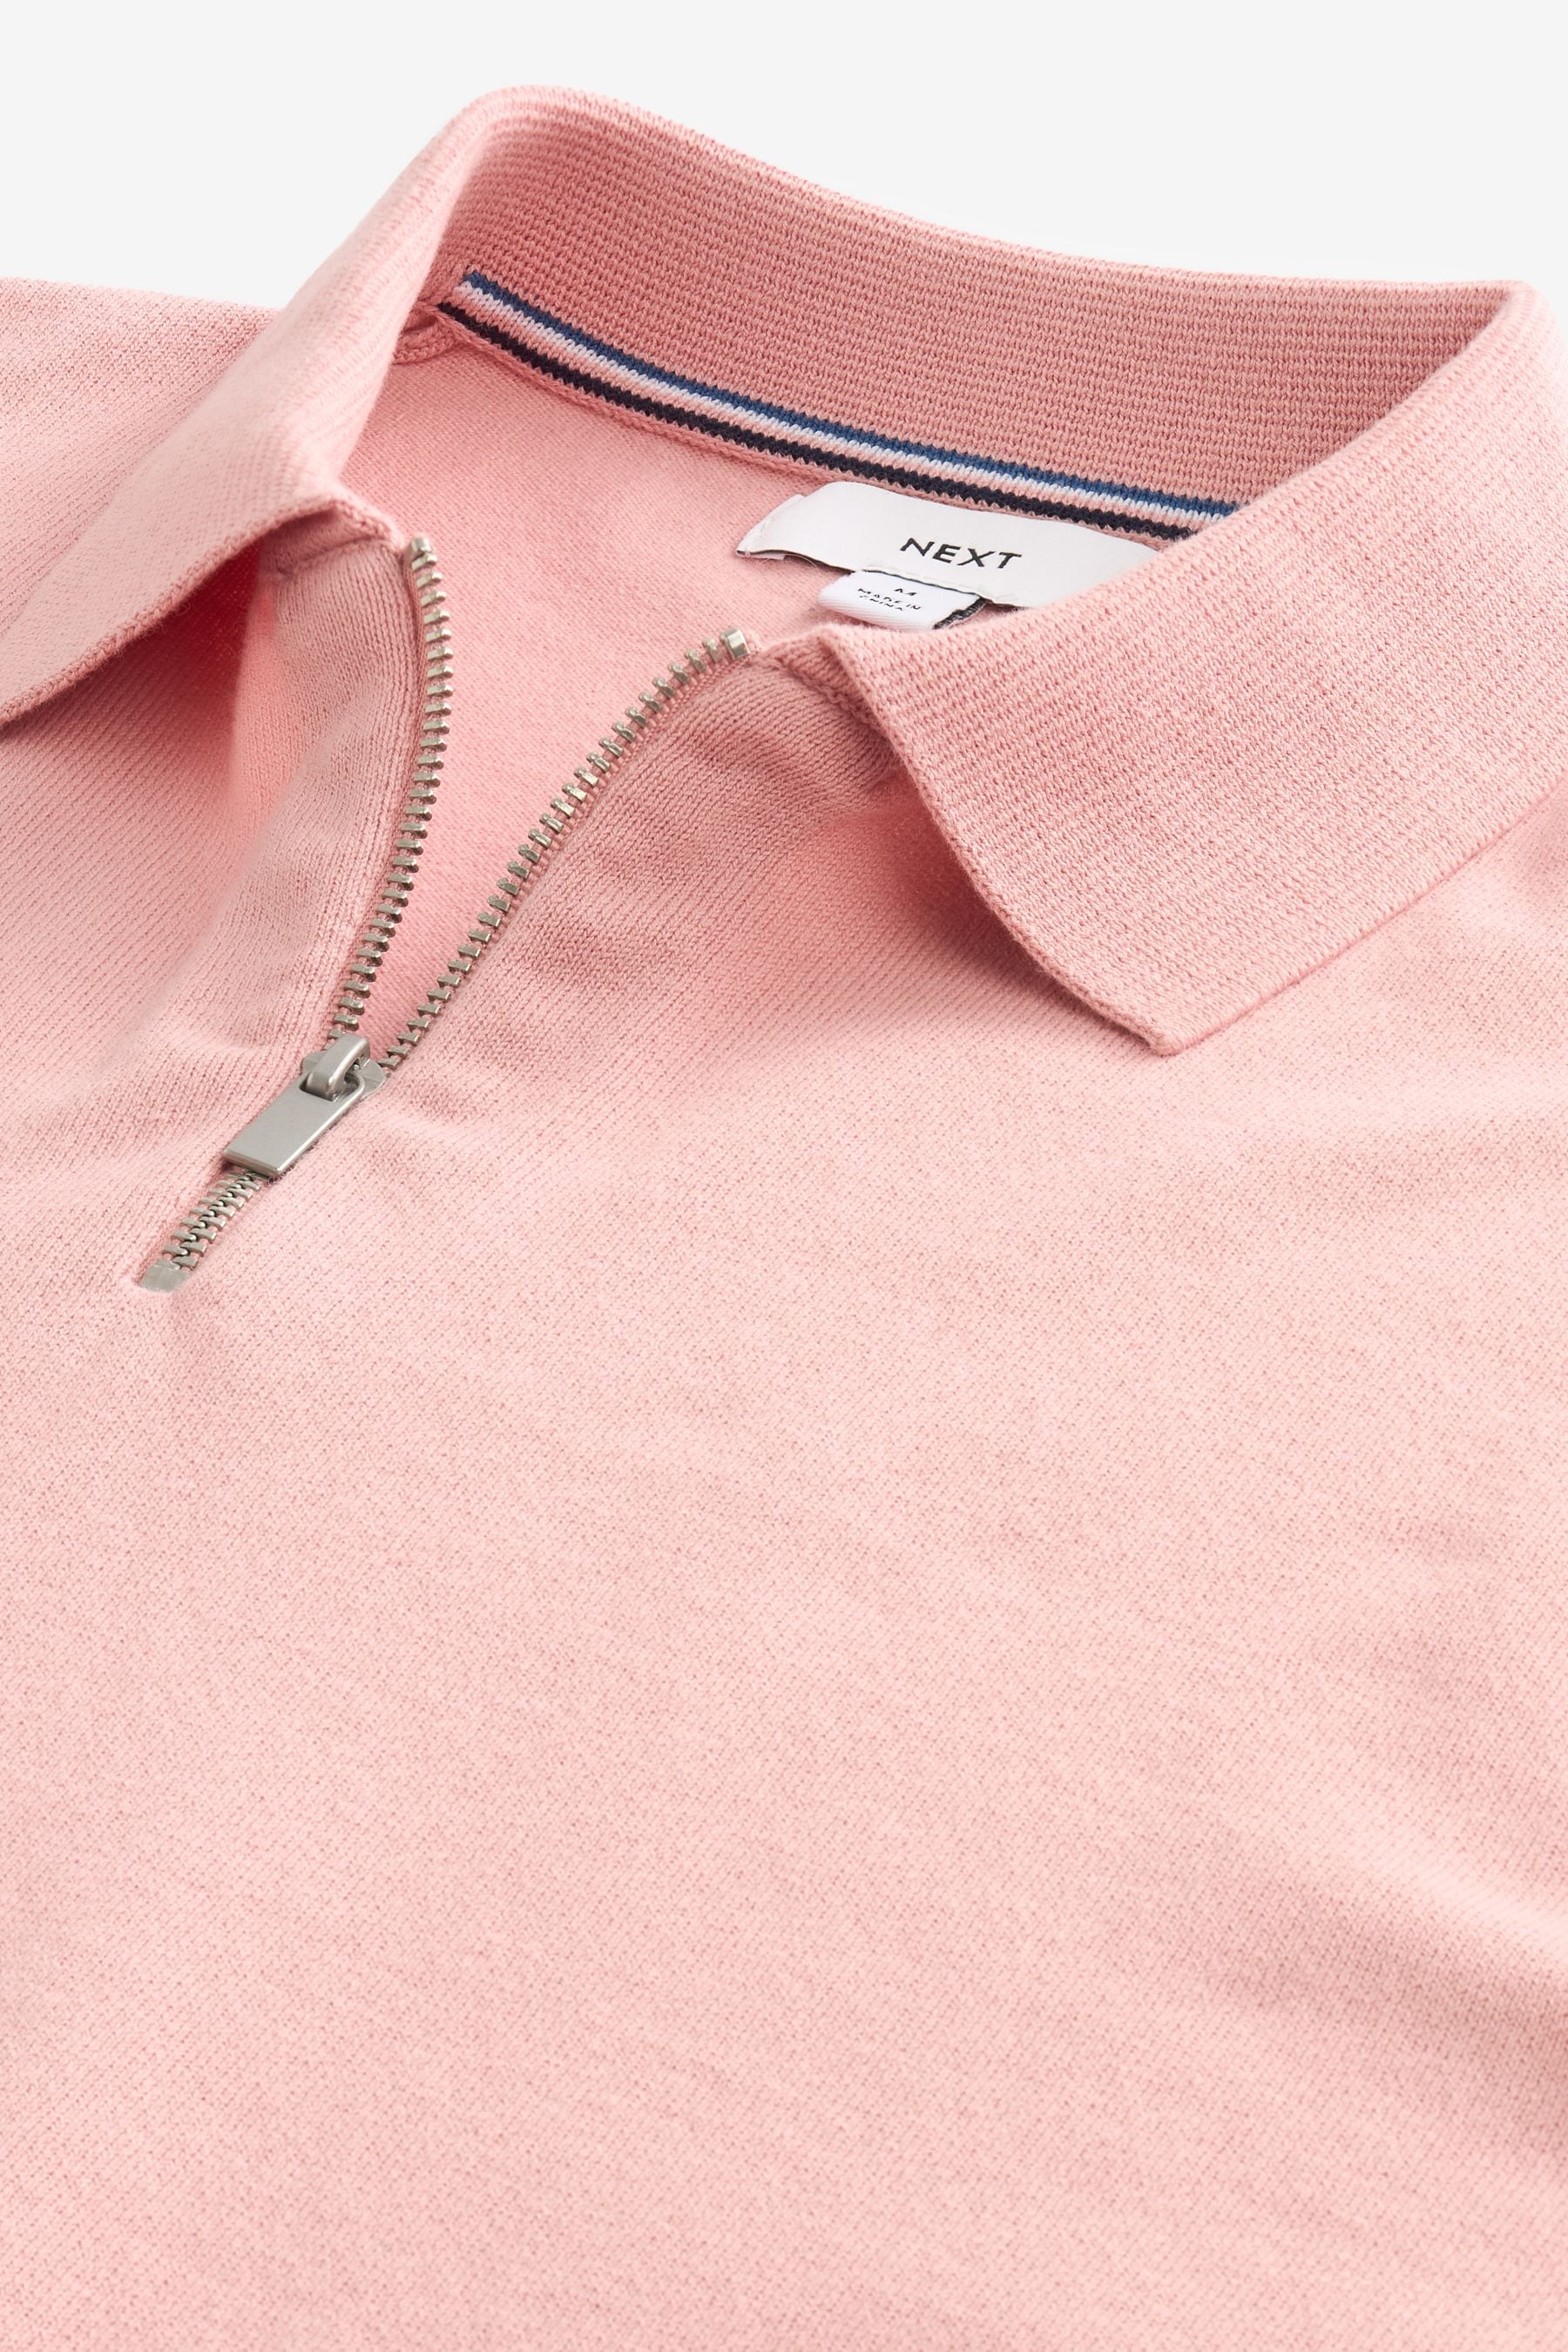 Pink Knitted Regular Fit Zip Polo Shirt